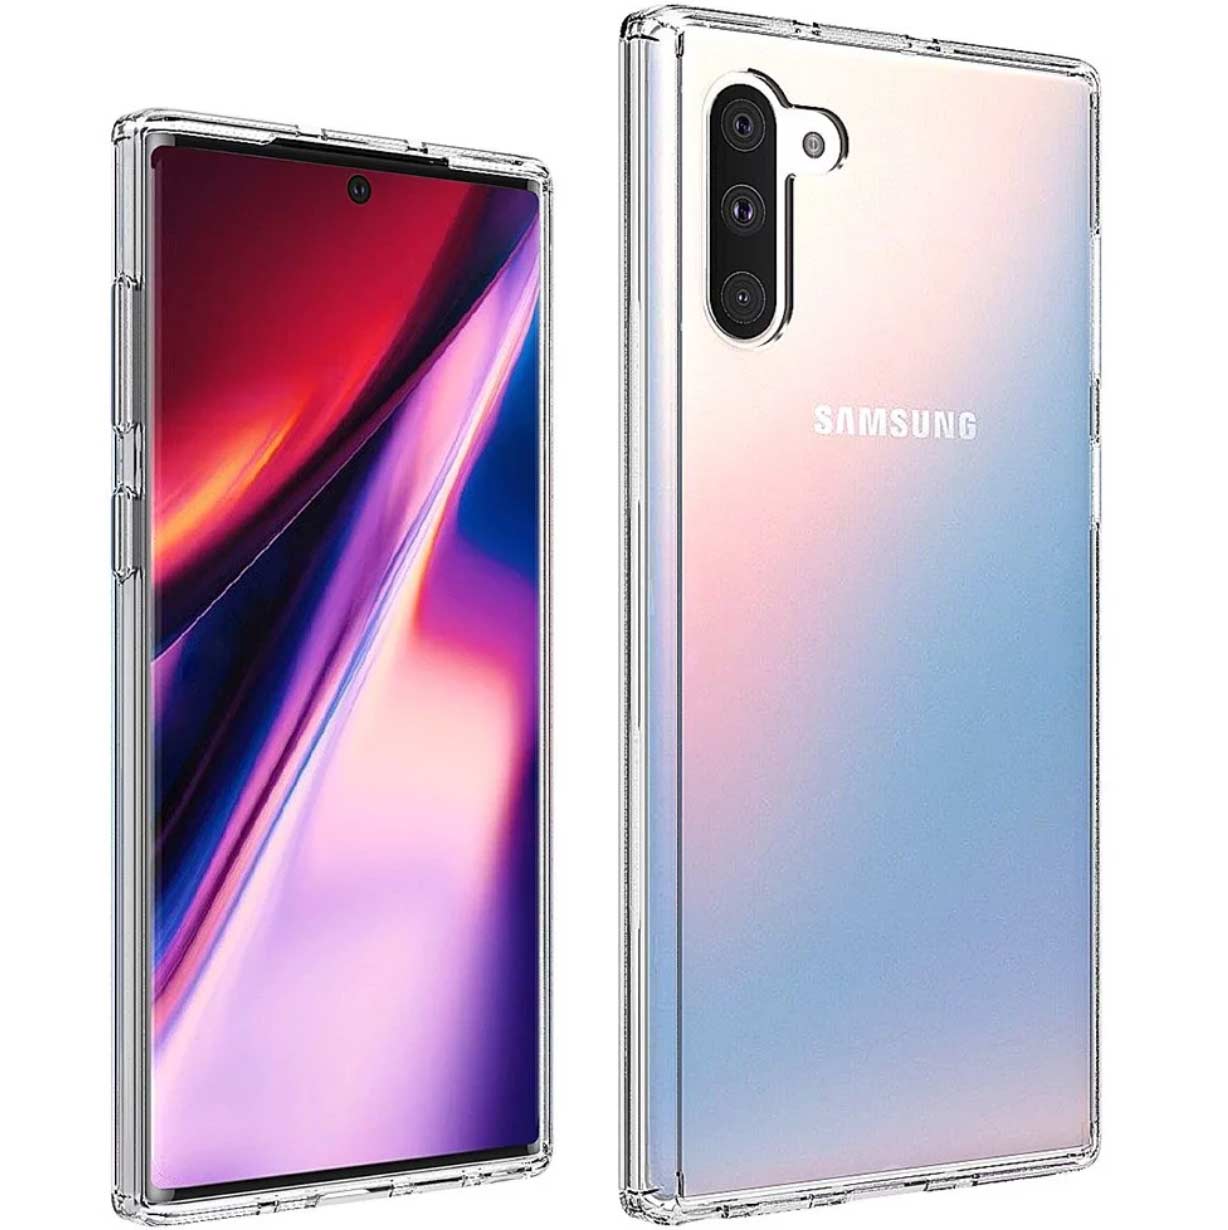 Galaxy Note 10 Renders Make You Forget About The Hole Slashgear